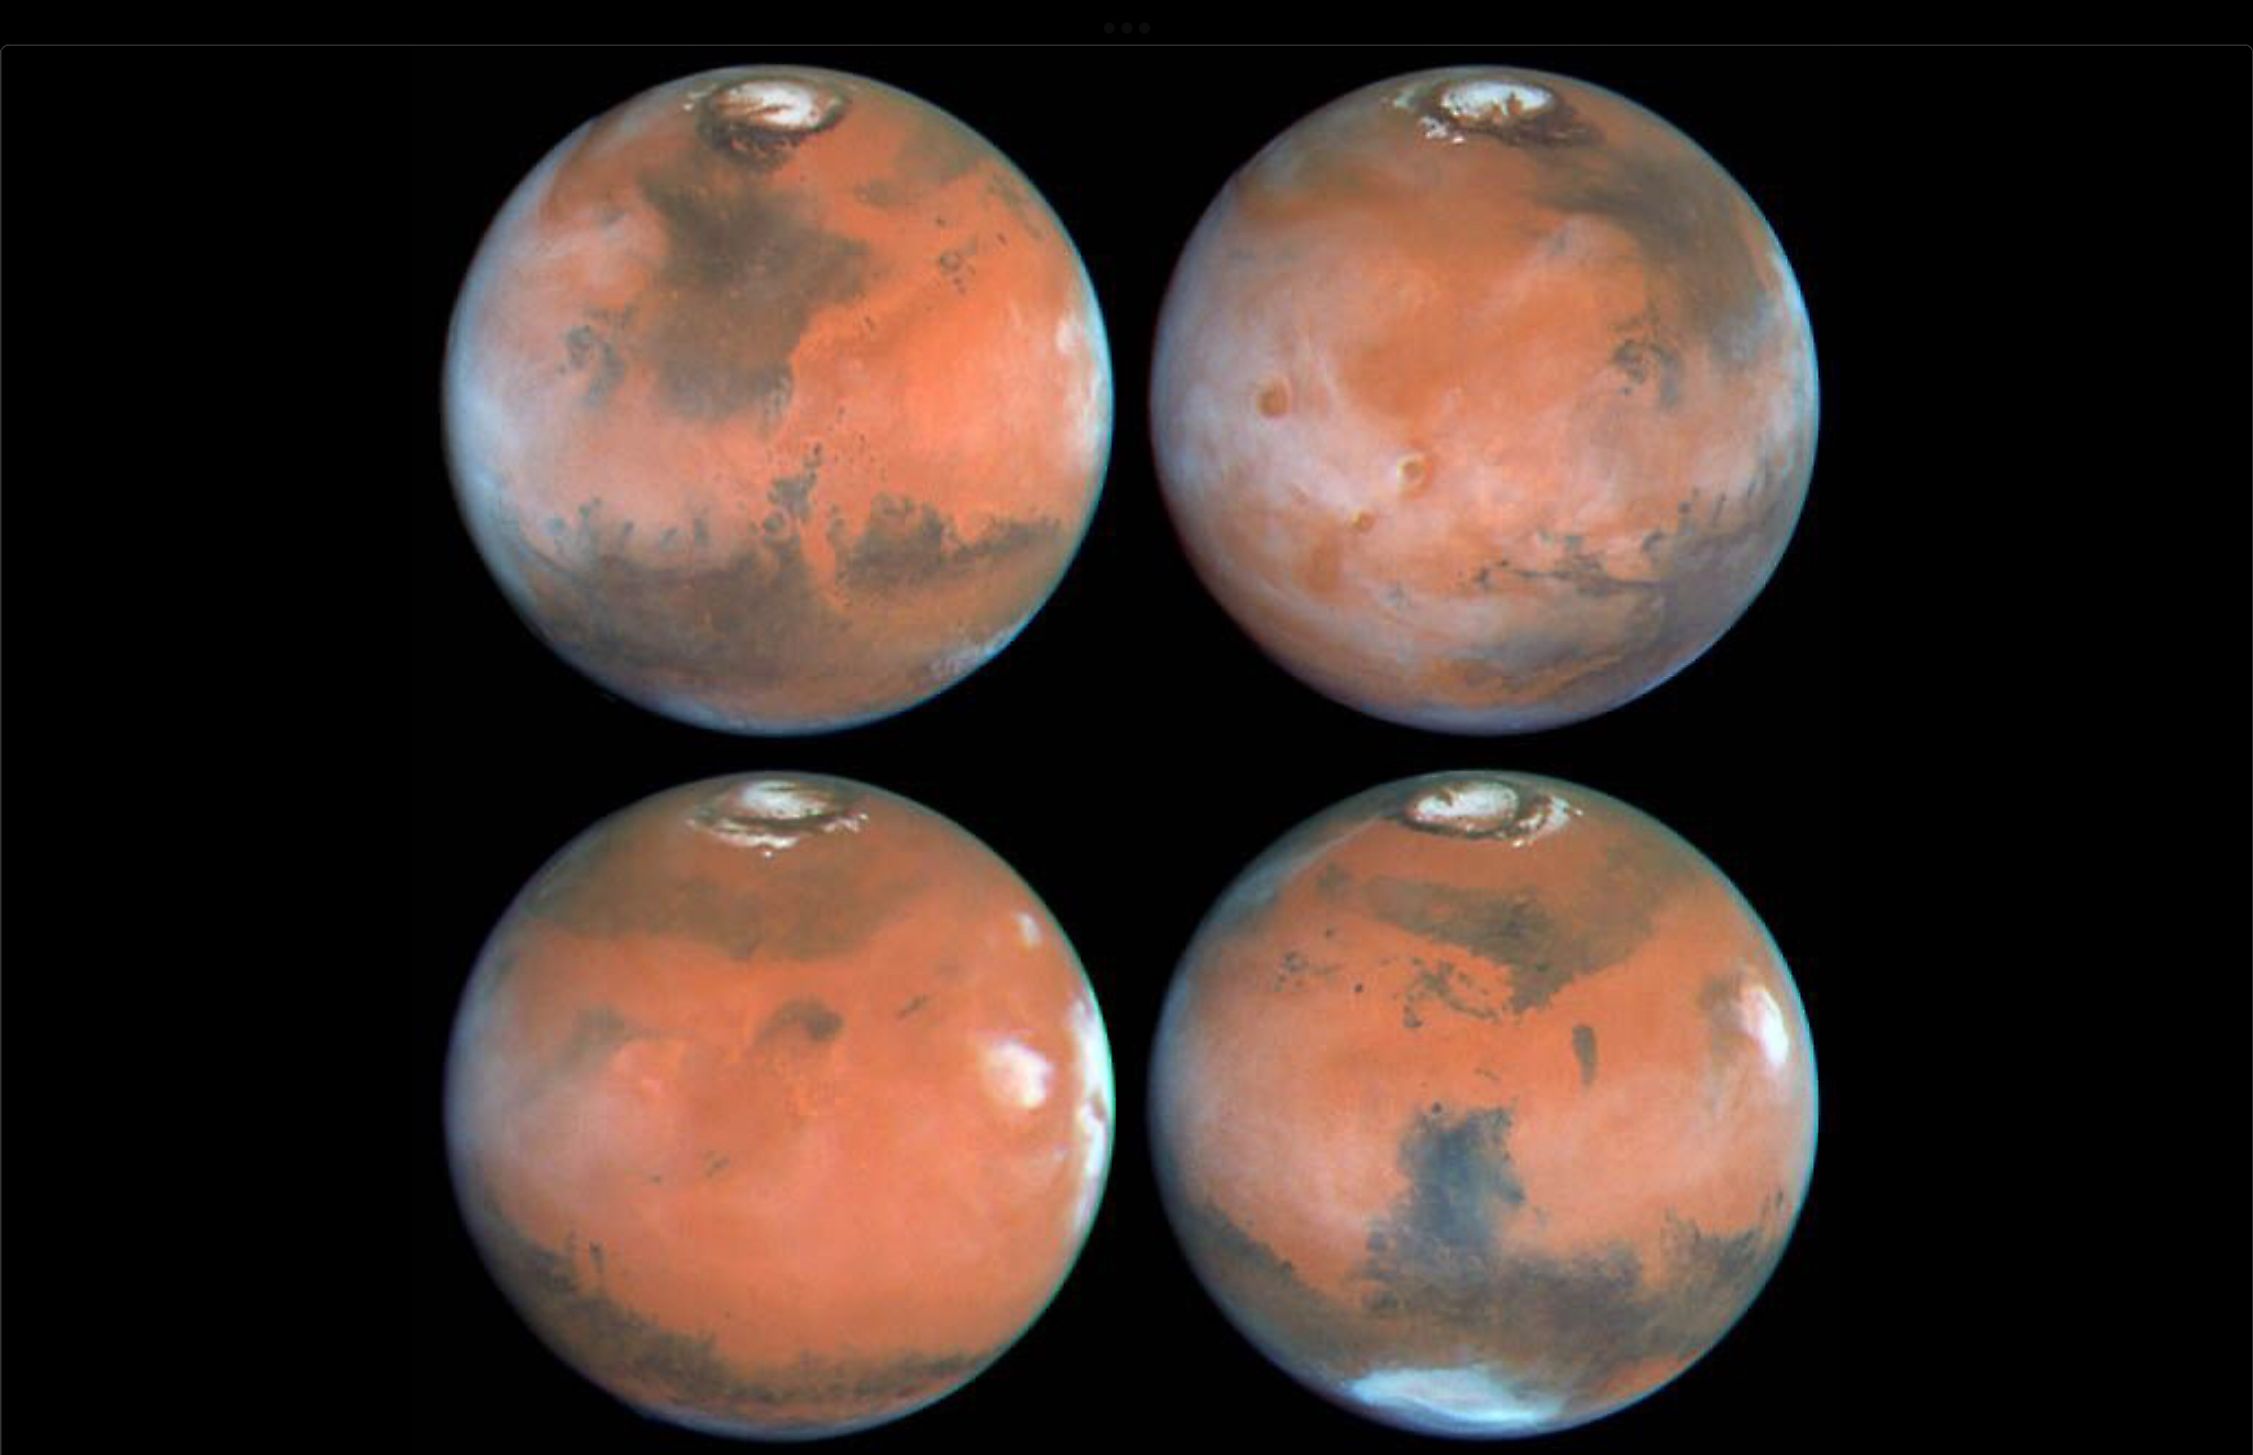 Mars seen from four different angles. Image credit: NASA